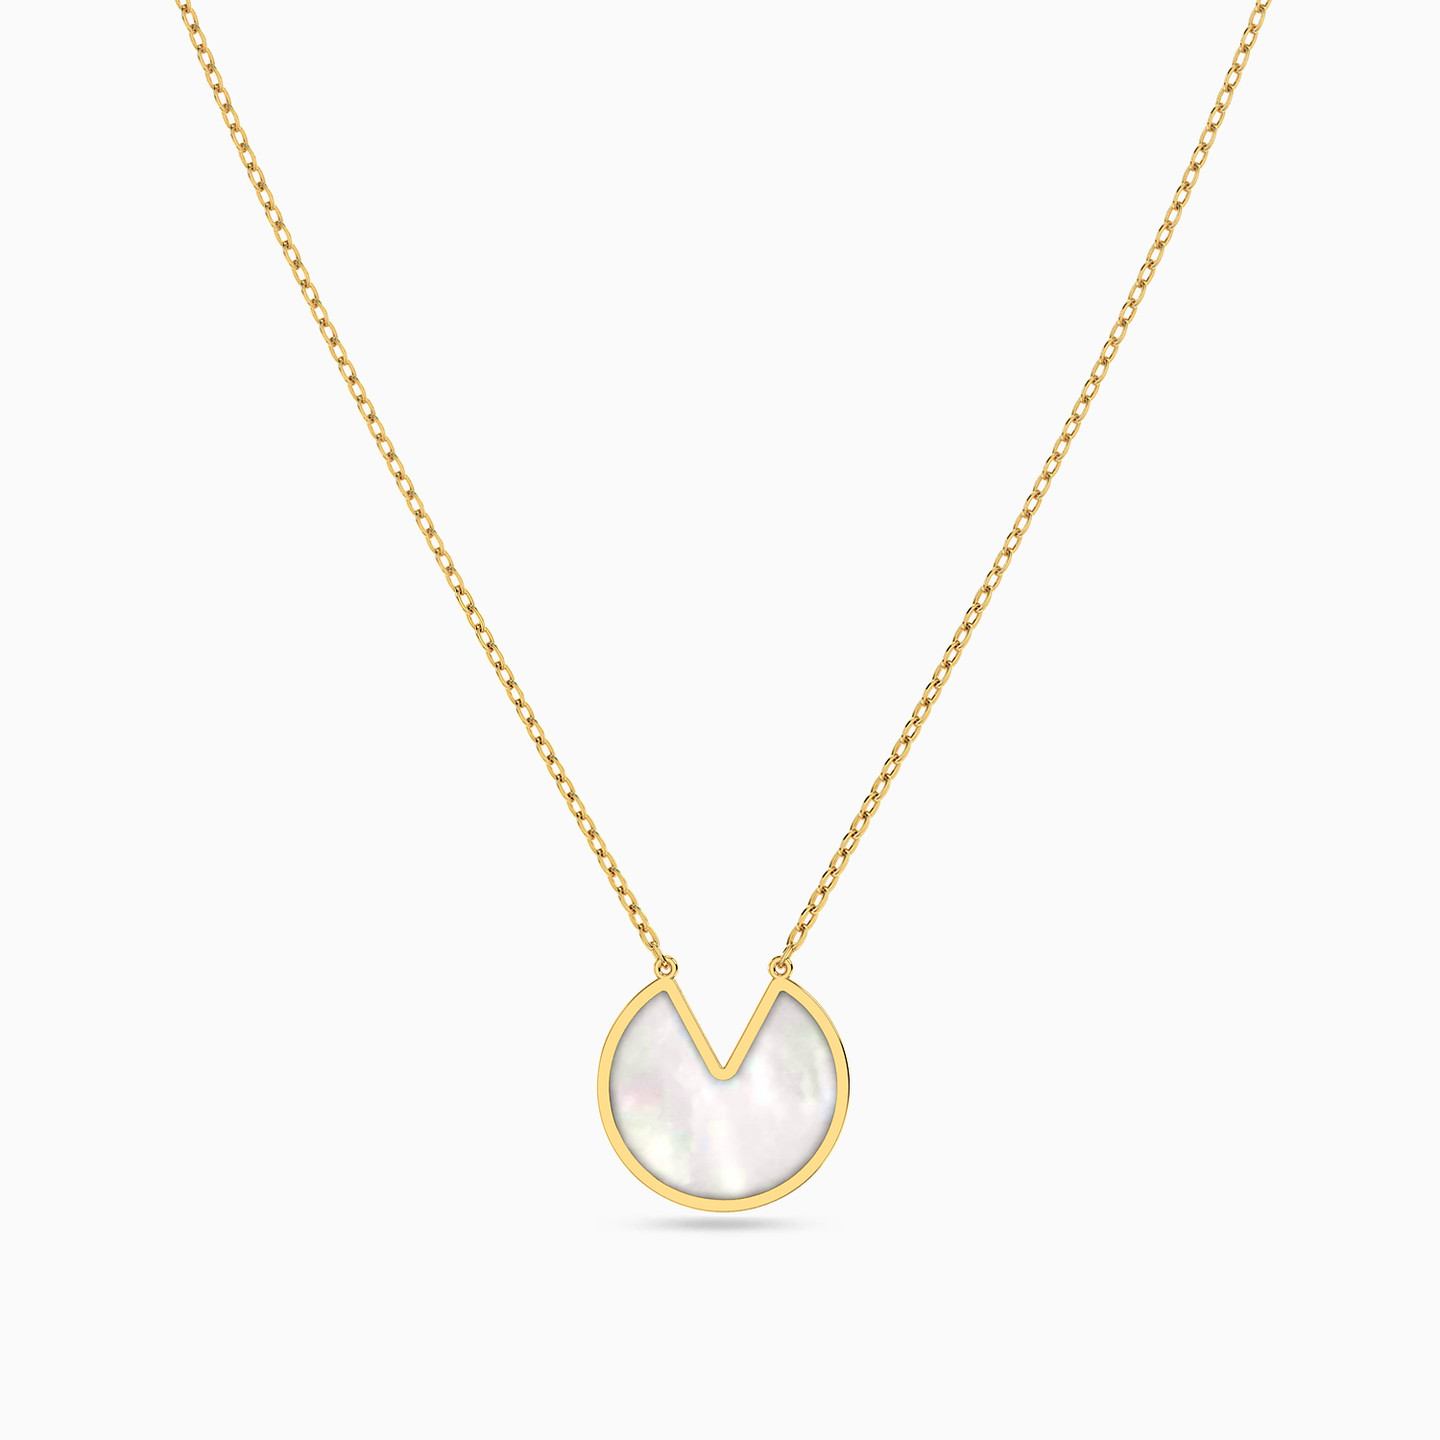 18K Gold Pearls Pendant Necklace - 3